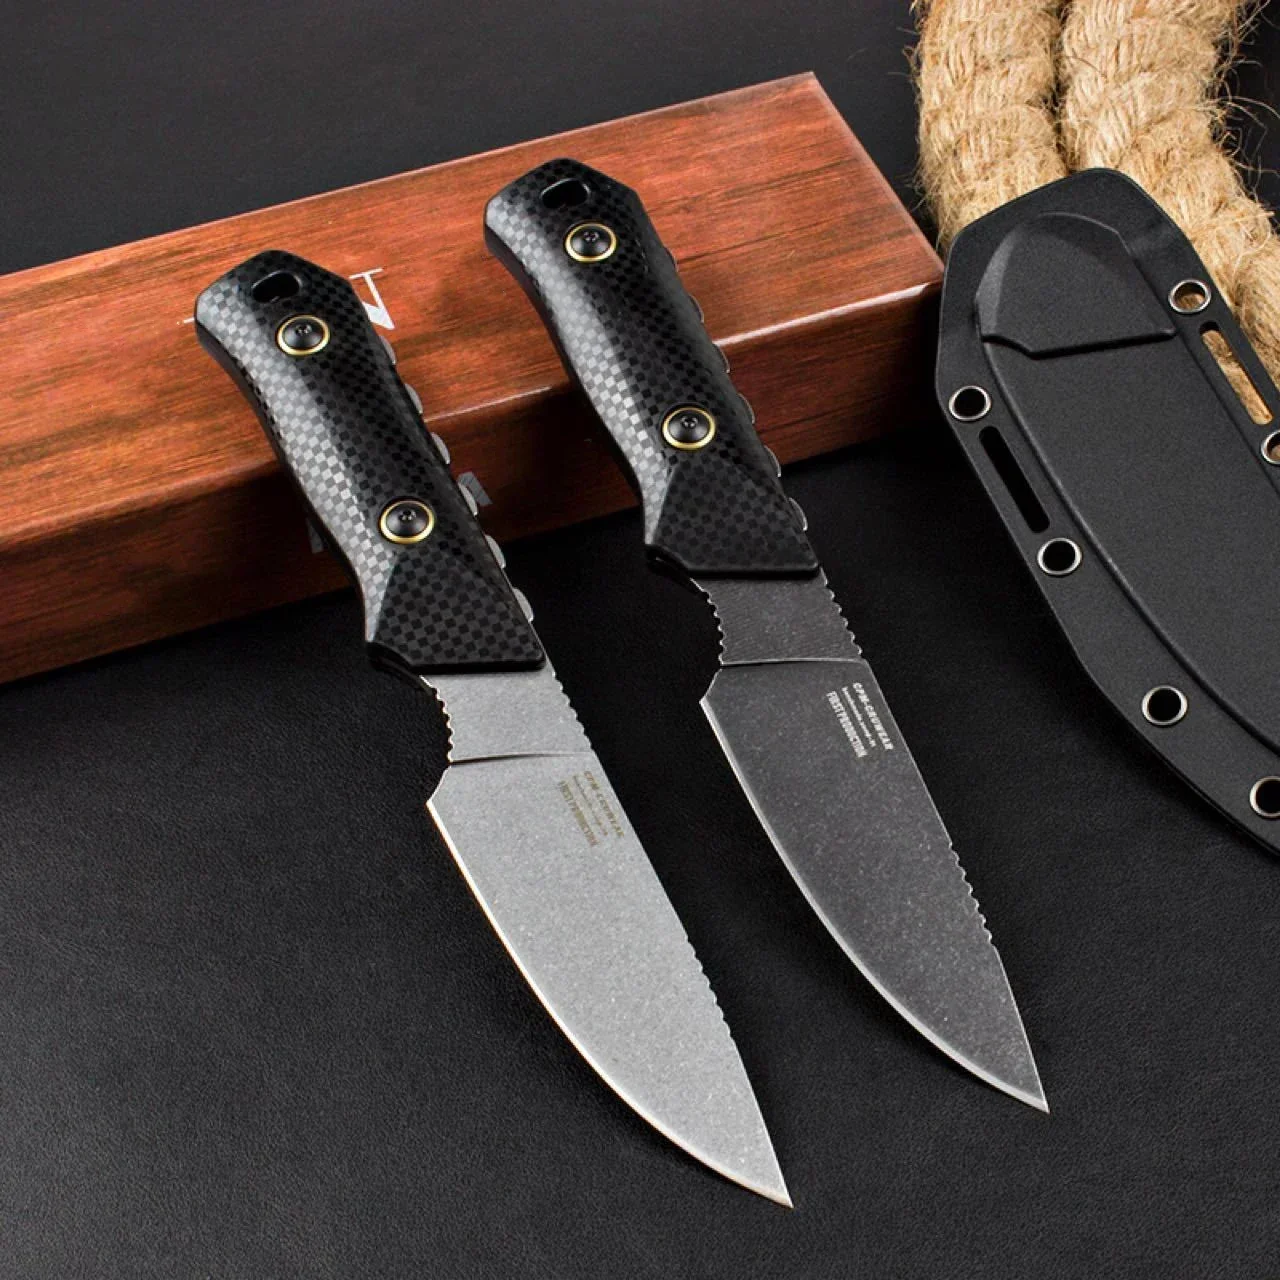 

Raghorn 15600 BM Fixed Blade Knives Outdoor Hunting Tactical D2 Pocket Knife With Sheath Wild Jungle Survival Utility EDC Tools